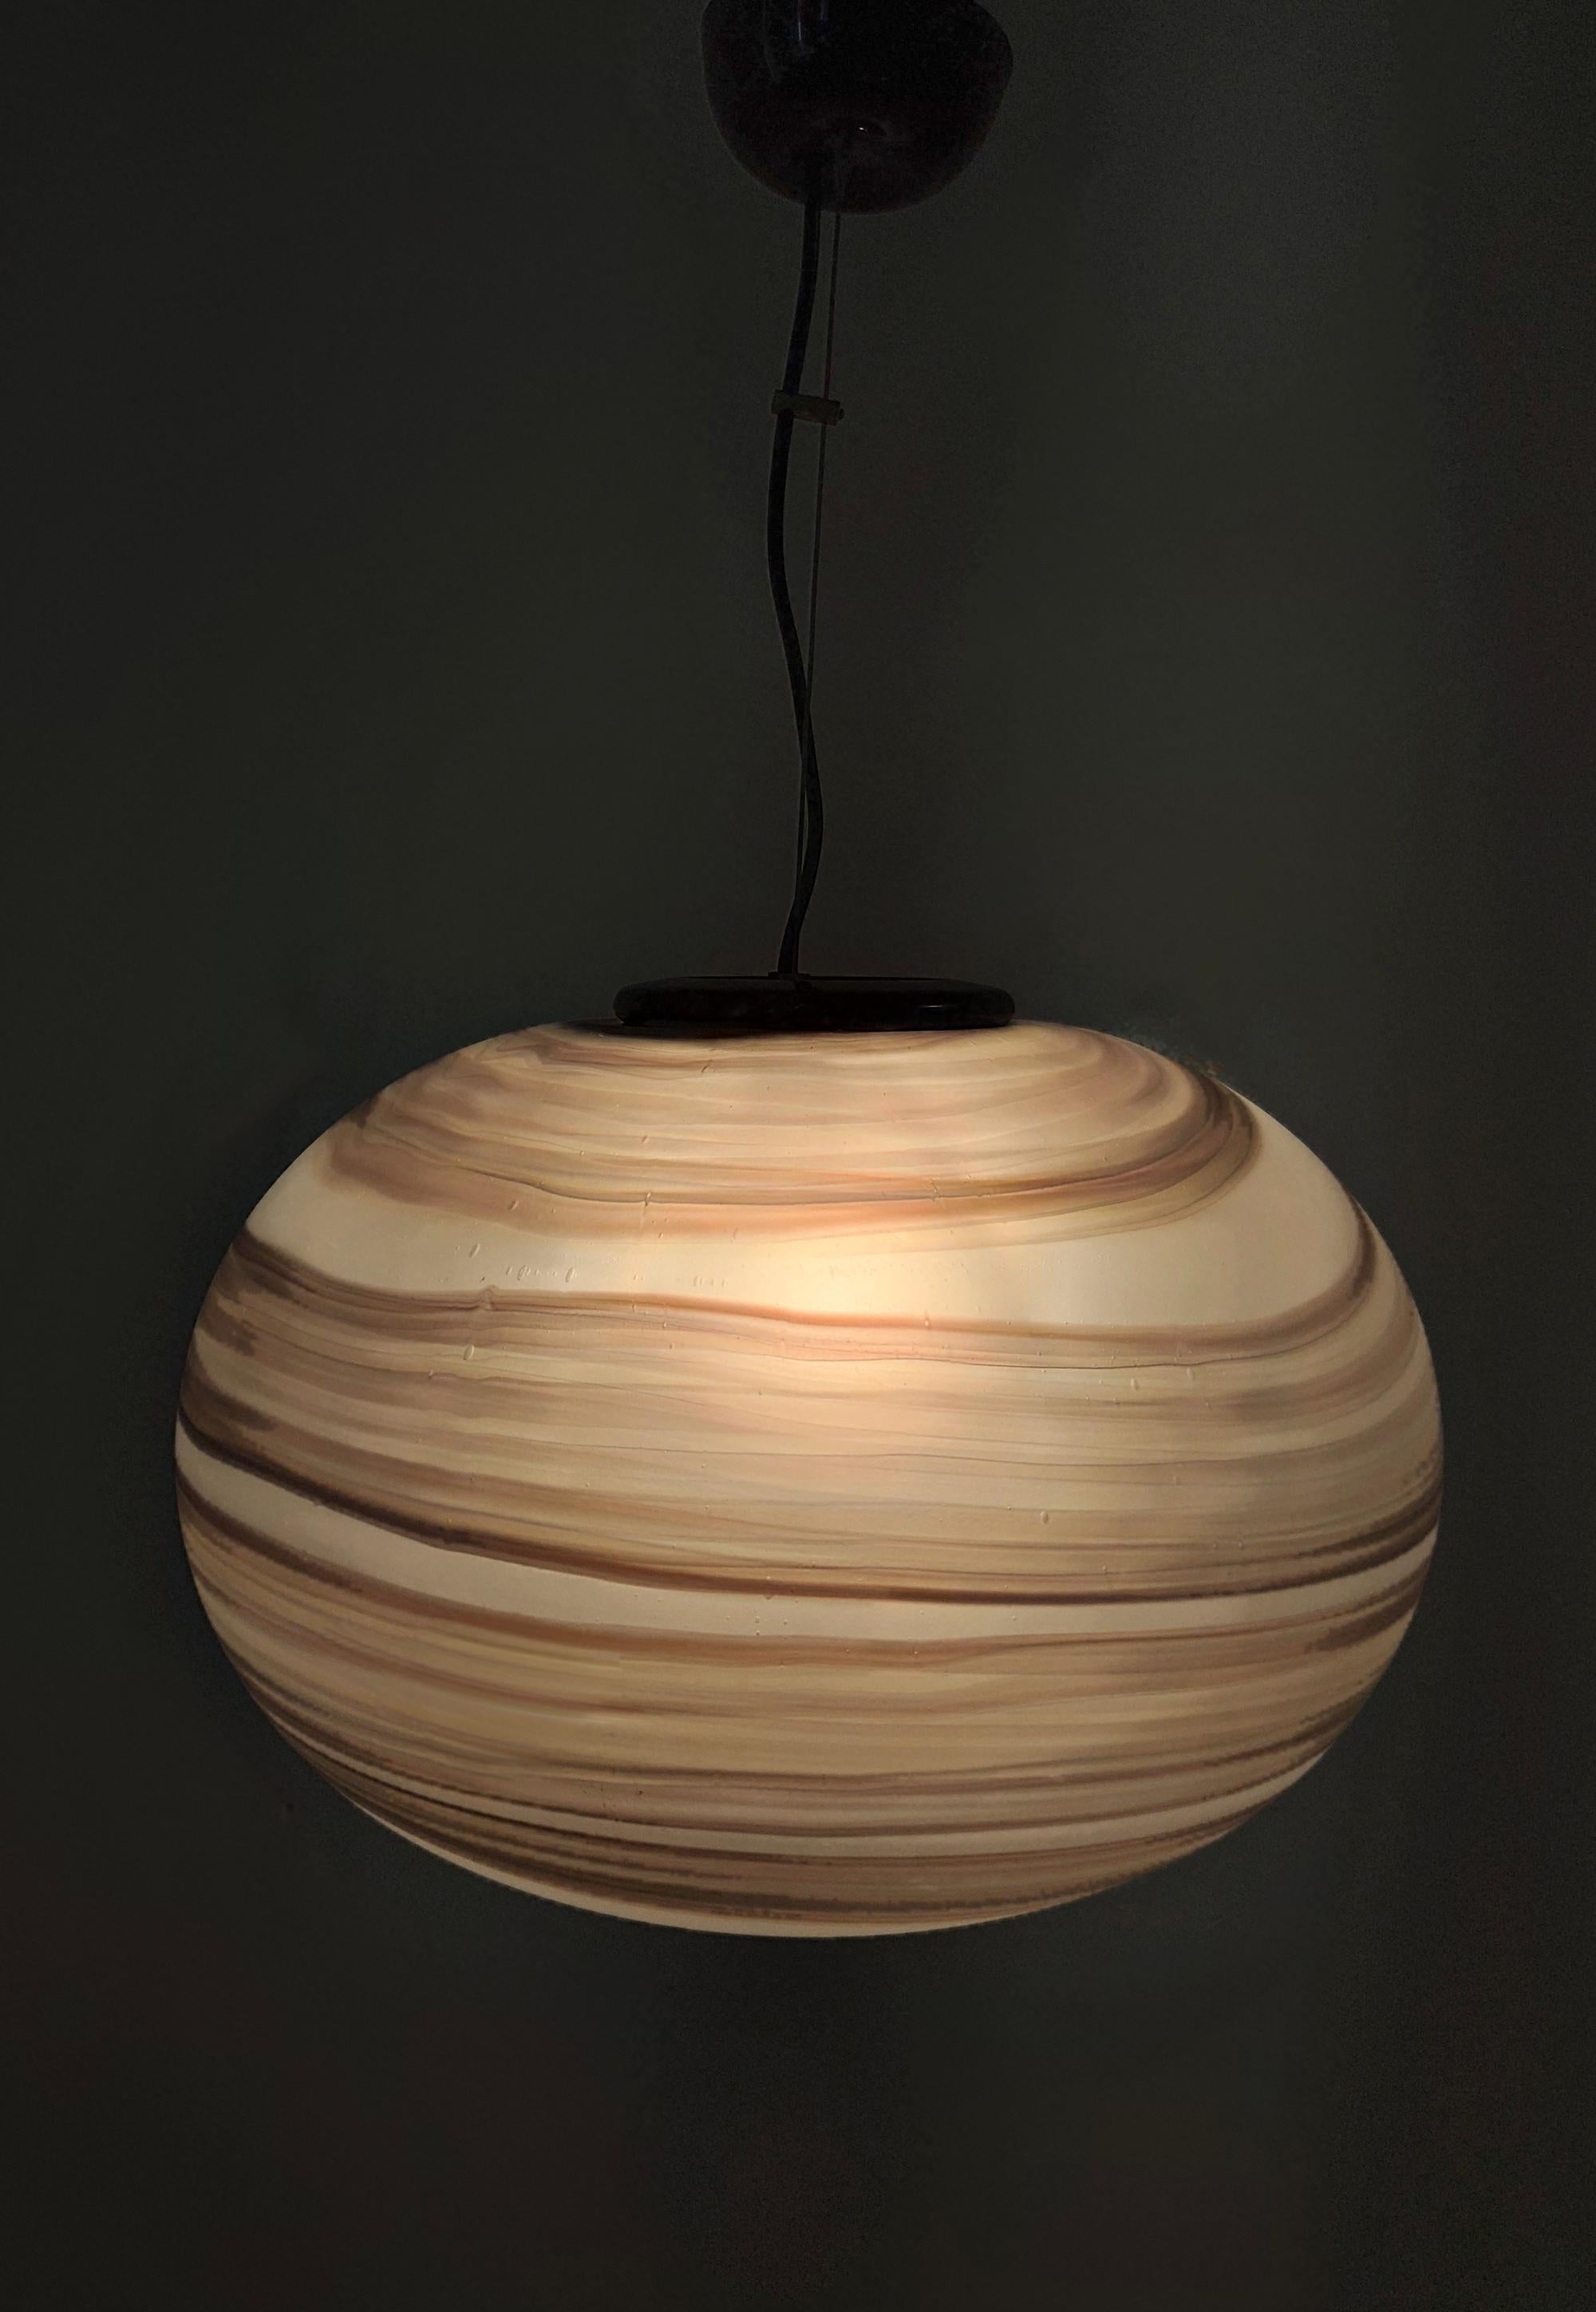 Made in Italy, 1970s - 1980s.
This pendant features and mold-blown etched glass shades with brown brush strokes. 
They are vintage pieces, therefore they might show slight traces of use, but they can be considered as in excellent original condition